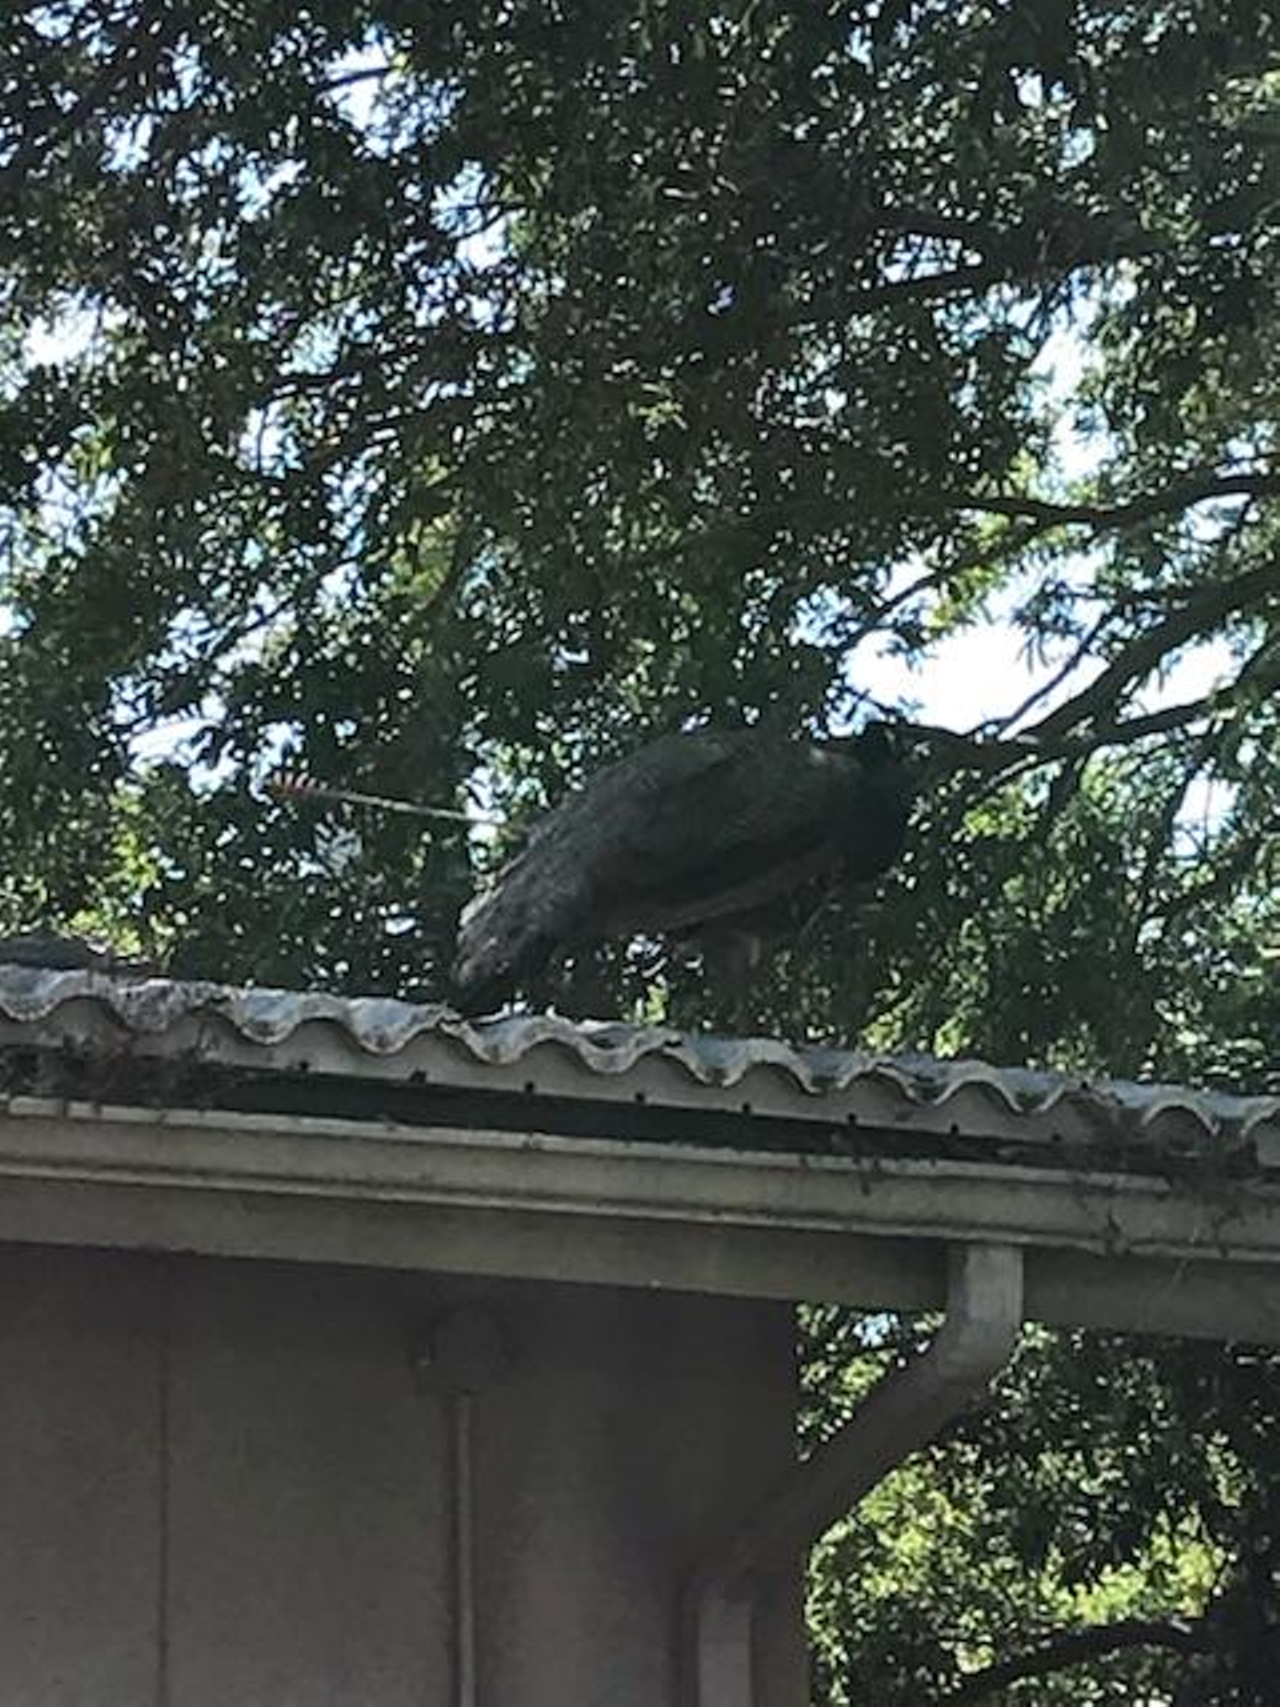 When rescuers approached the peacock, in the peafowl-laden Greenbriar subdivision, the peacock was clearly debilitated but in no mood for "assistance."